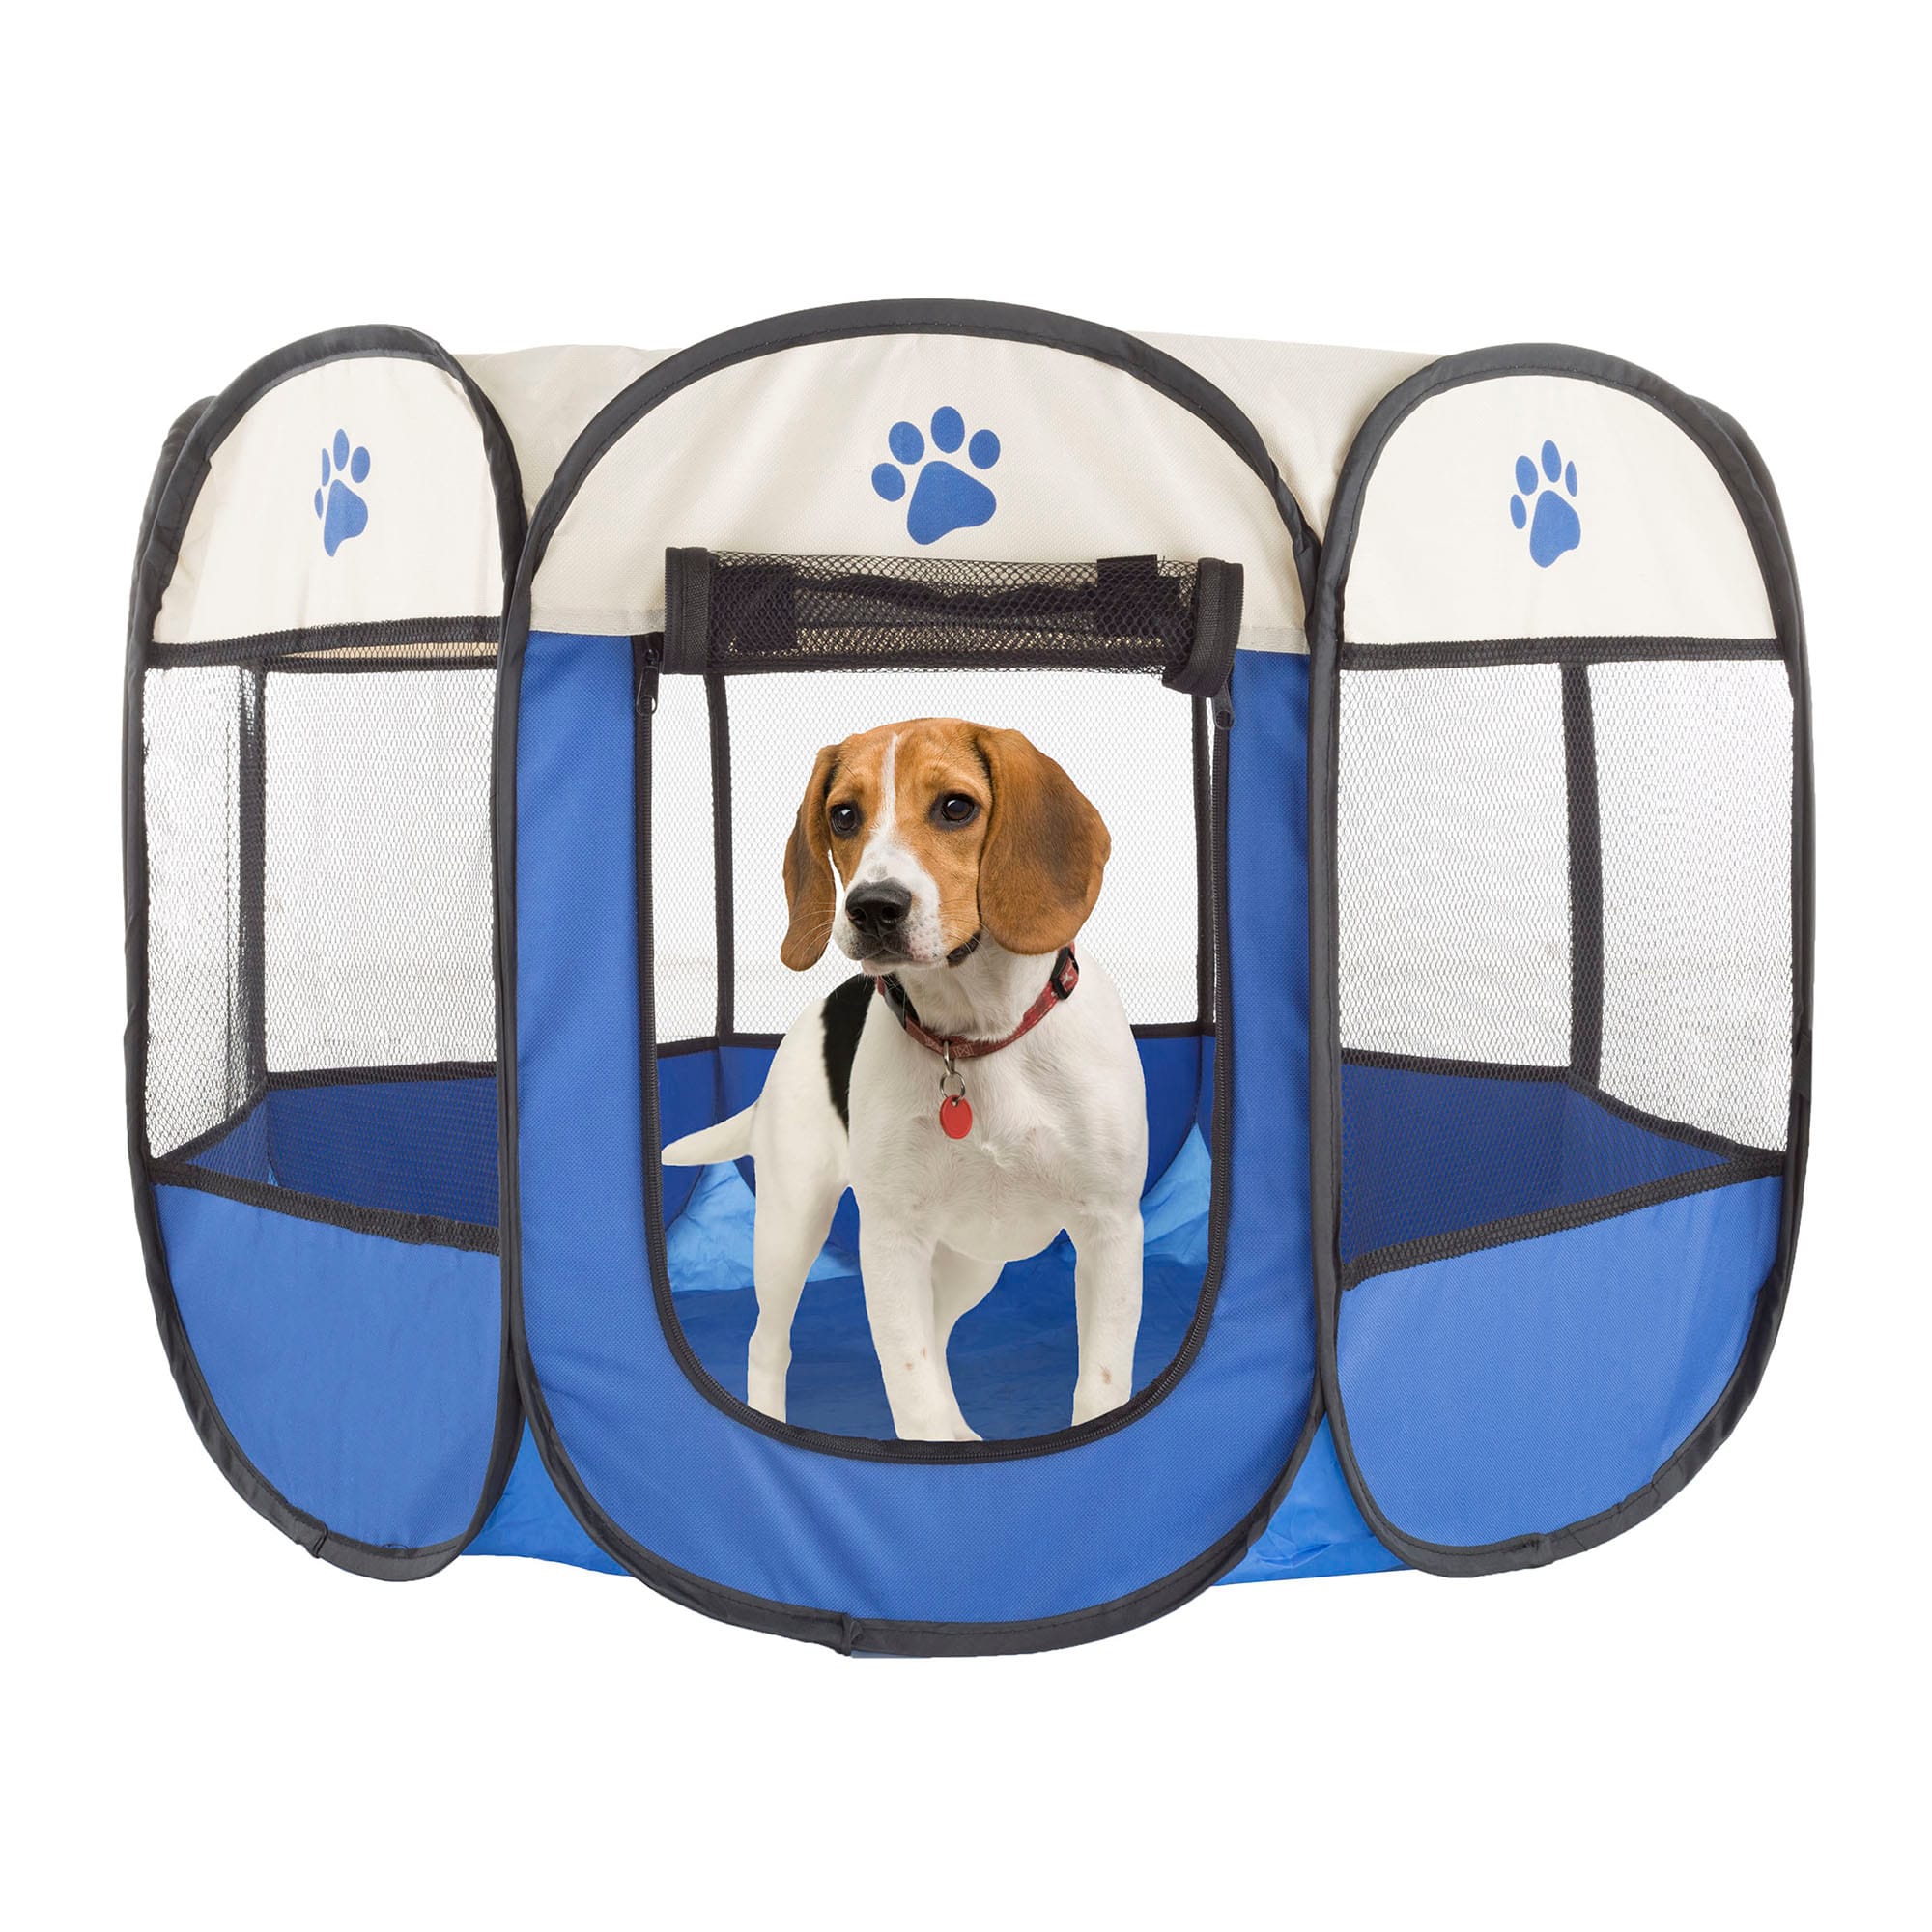 Photos - Pet Carrier / Crate Petmaker Pet Playpen with Carrying Case for Indoor/Outdoor Use, 3 